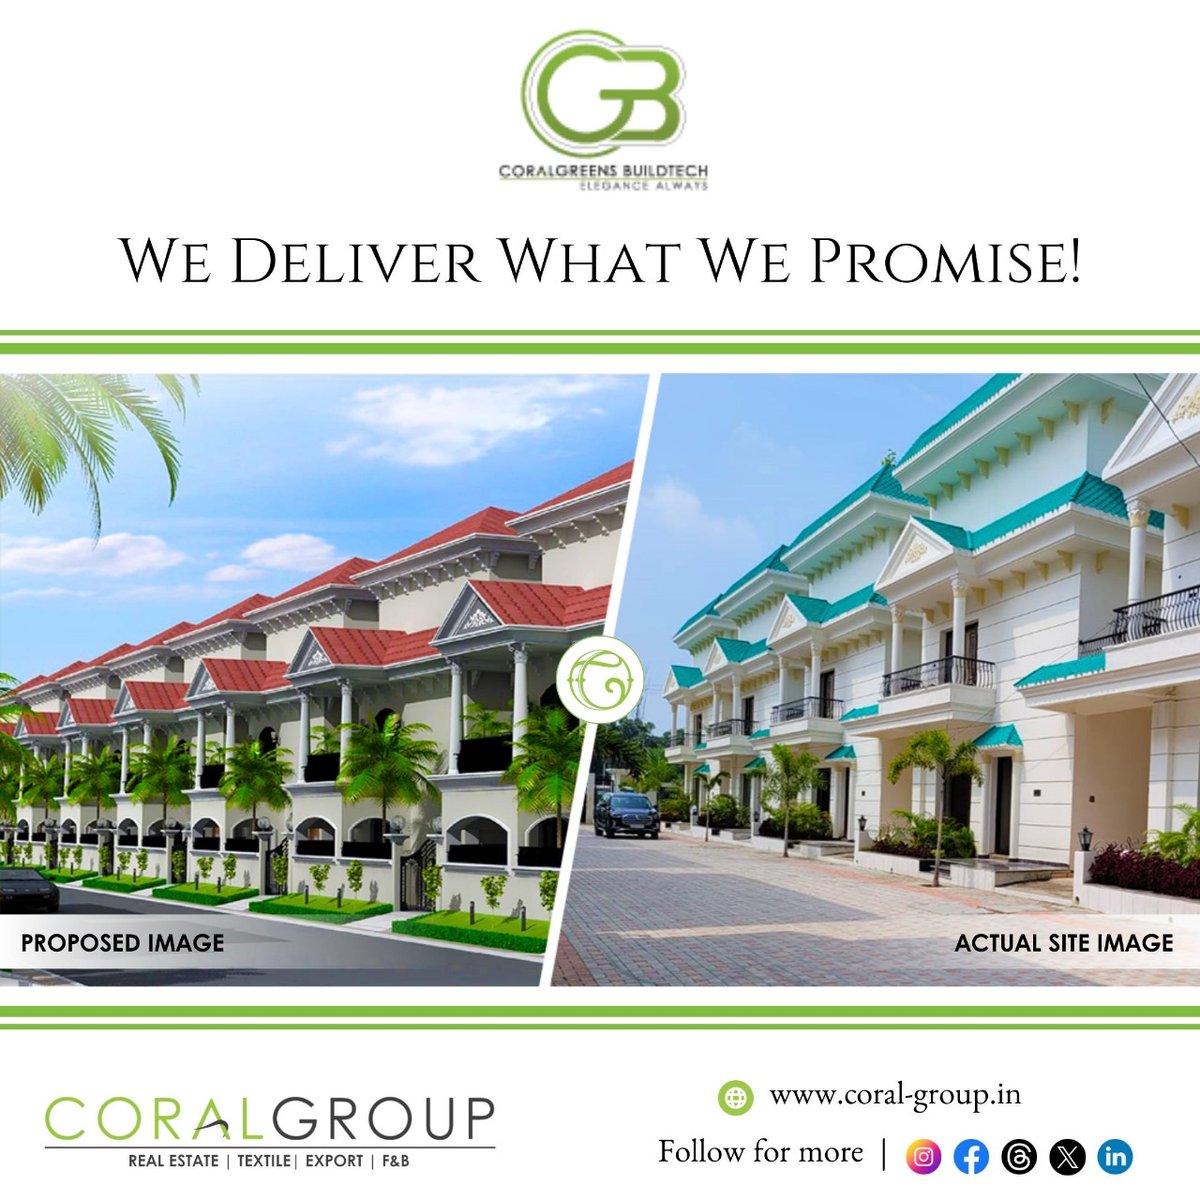 At Coral Greens, every square foot is thoughtfully curated to elevate your lifestyle with unparalleled luxury and quality. Amazing style and living designed just for those who appreciate the best.
#luxuryliving #modernhomes #realestate #dreamspaces #coralgreens #coralgroup